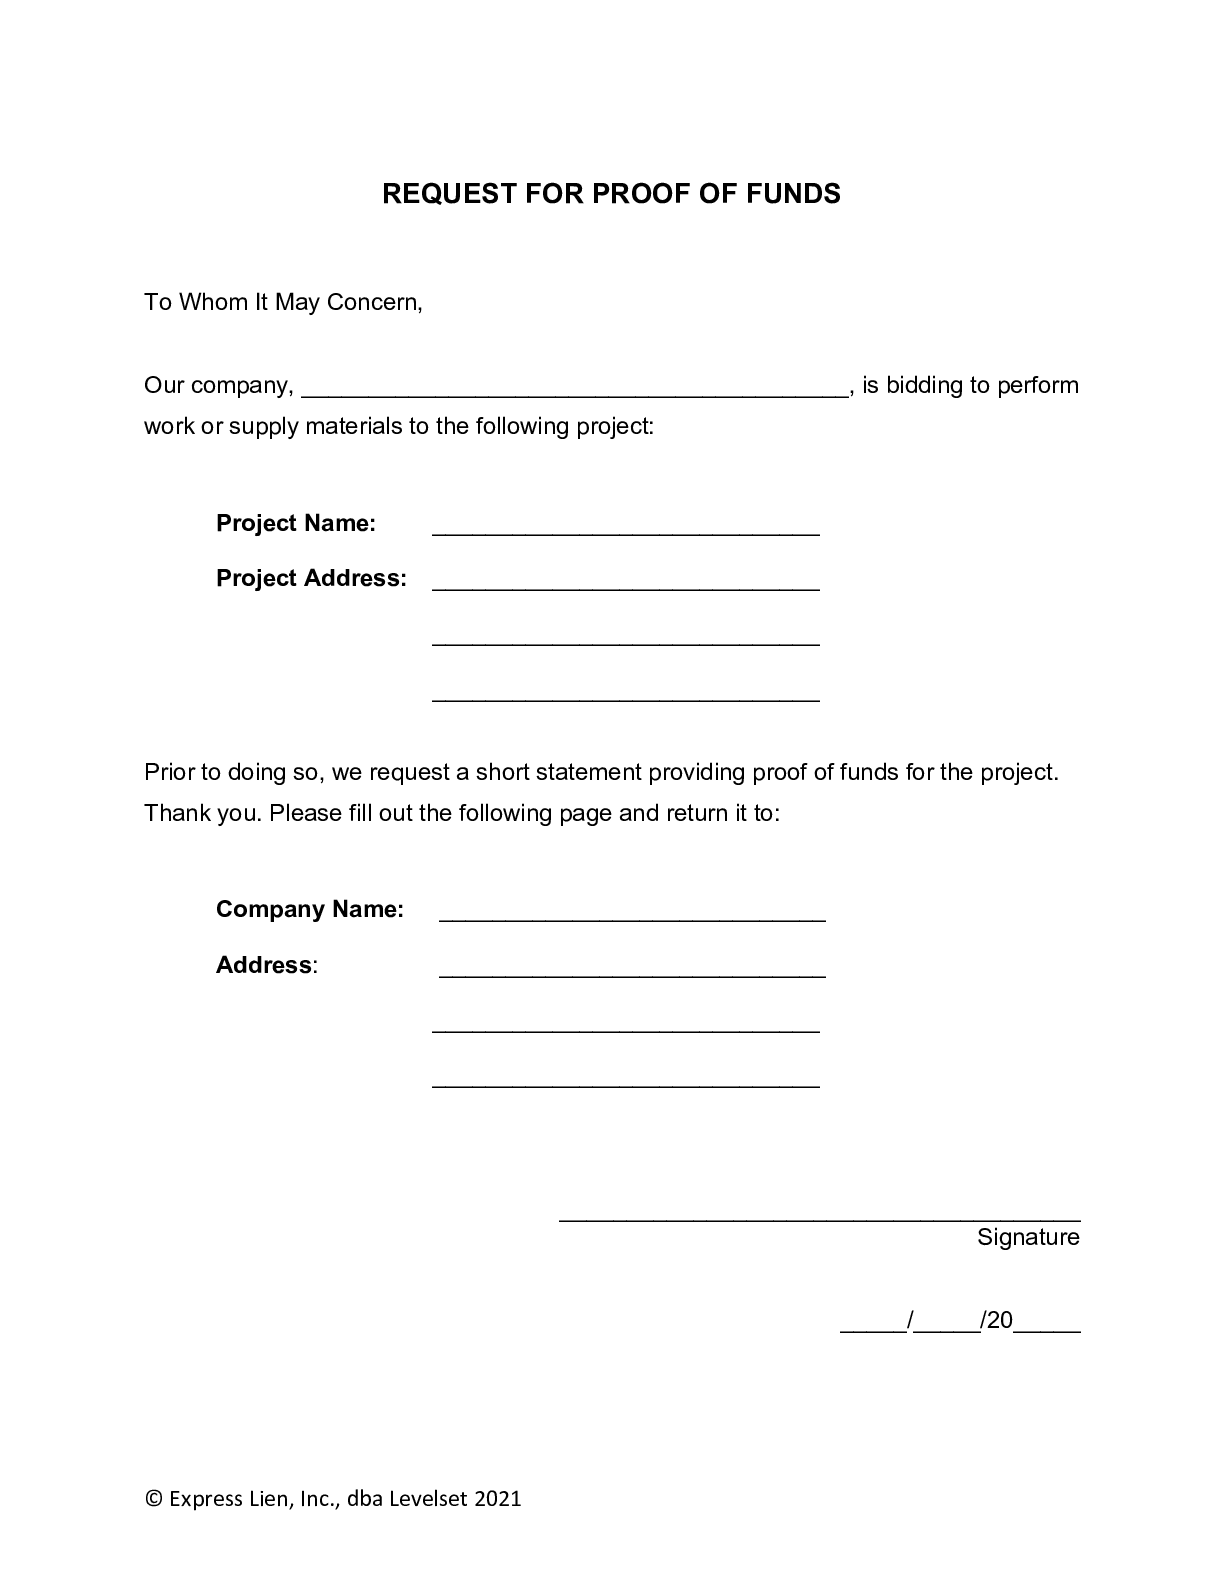 Request for Proof of Funding Letter [Free Template]